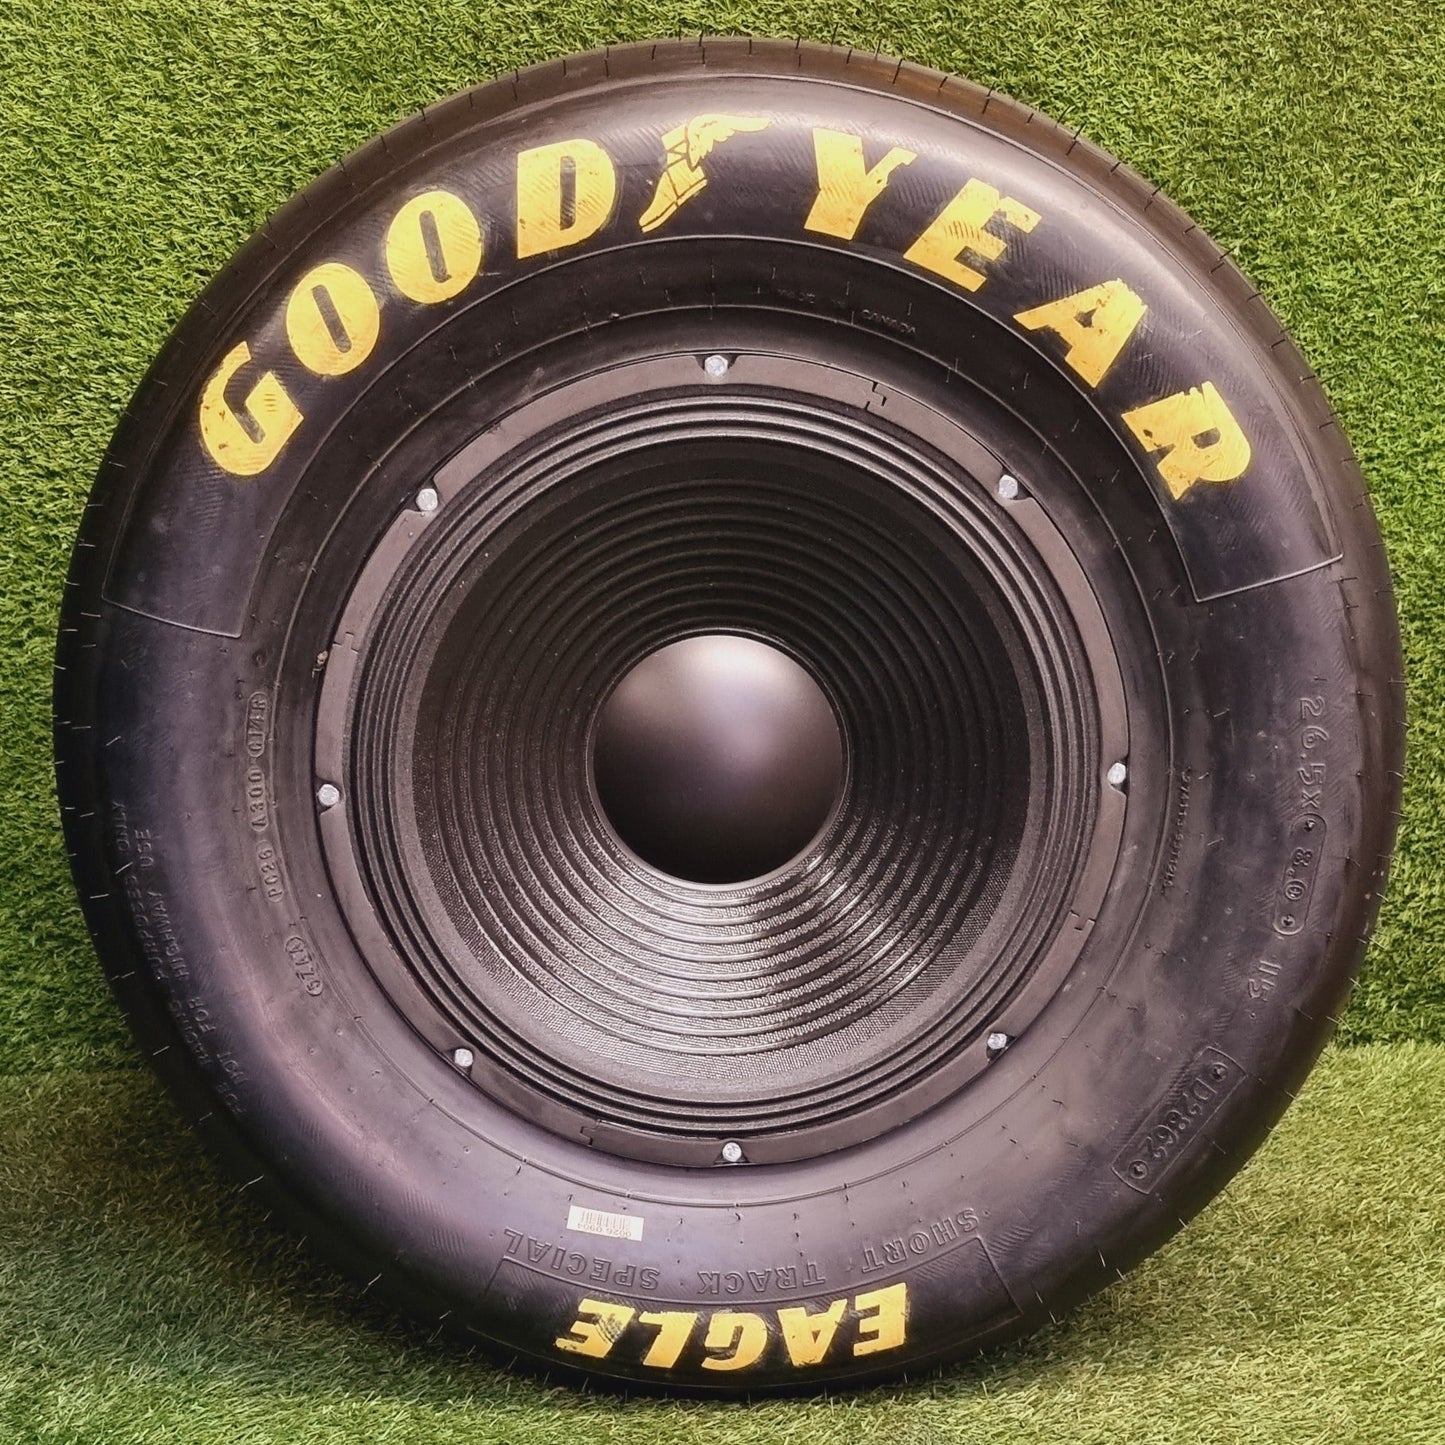 15" Bluetooth Speaker built into a New Goodyear Racing Slick Tyre.